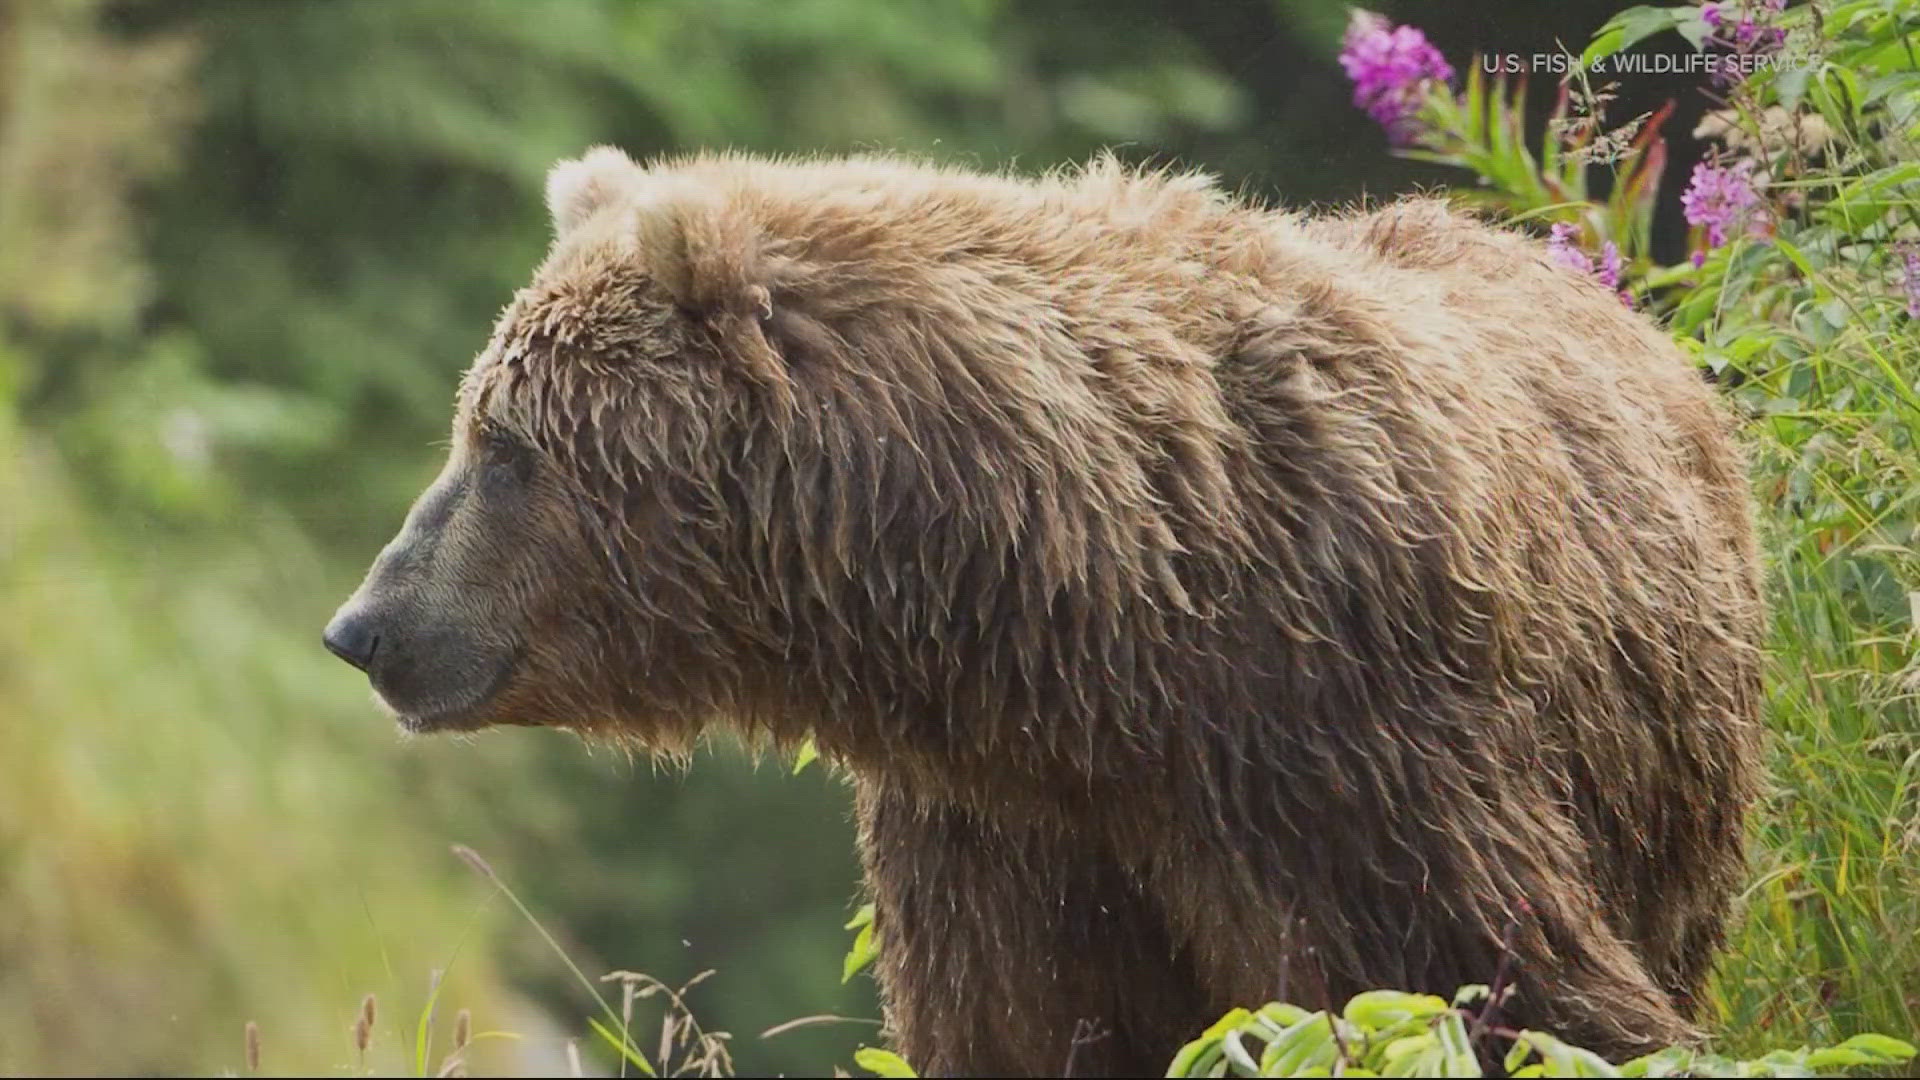 The National Parks Service and U.S. Dept. of Fish and Wildlife are bringing grizzly bears back to Washington’s North Cascades.